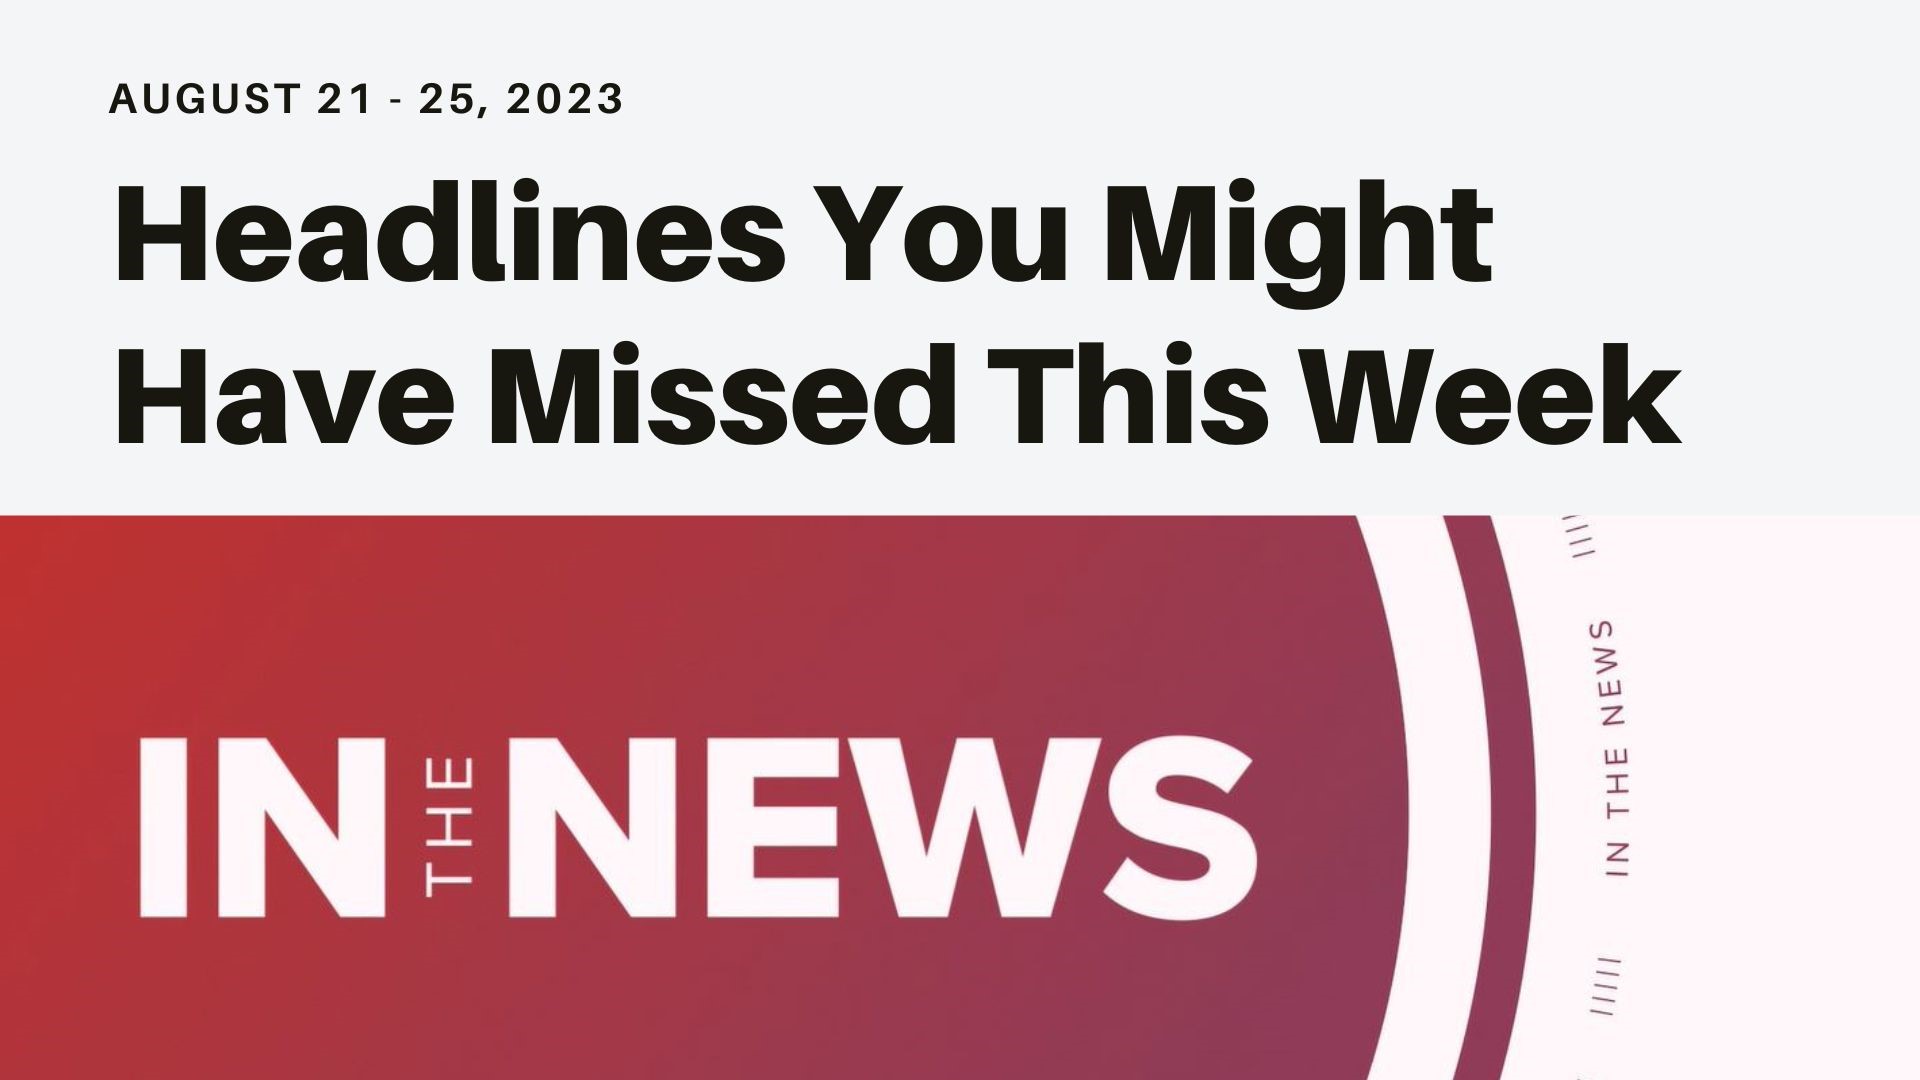 A look at the headlines you might have missed this week from Donald Trump surrendering in Georgia to Pres. Biden visiting Maui and tropical storm Hilary in CA.